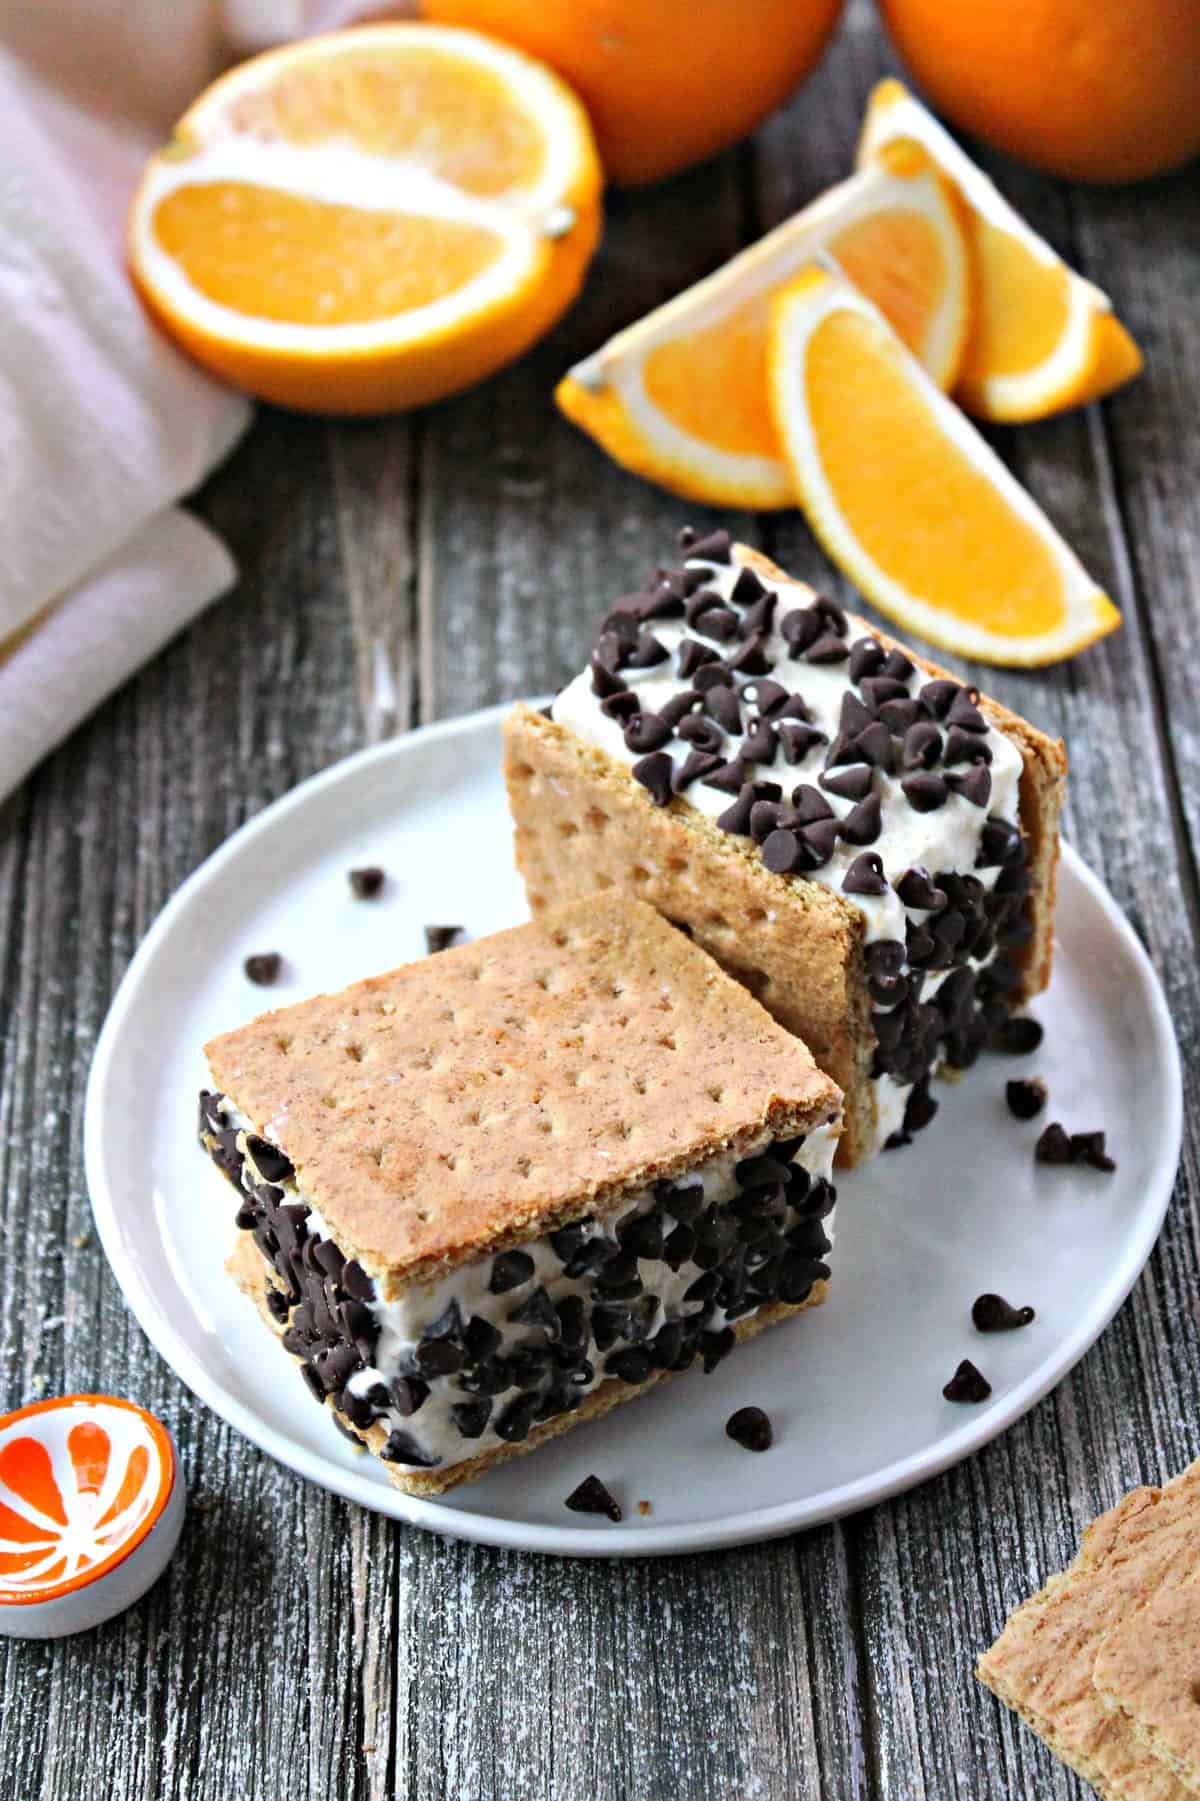 Easy No-Churn Orange-Chip Ice Cream Sandwiches! Orange-infused, no churn ice cream is cut into perfect portions, sandwiched between graham crackers & rolled in mini chocolate chips. A sweet summer dessert that's easy to whip up with your kids and even easier to eat!